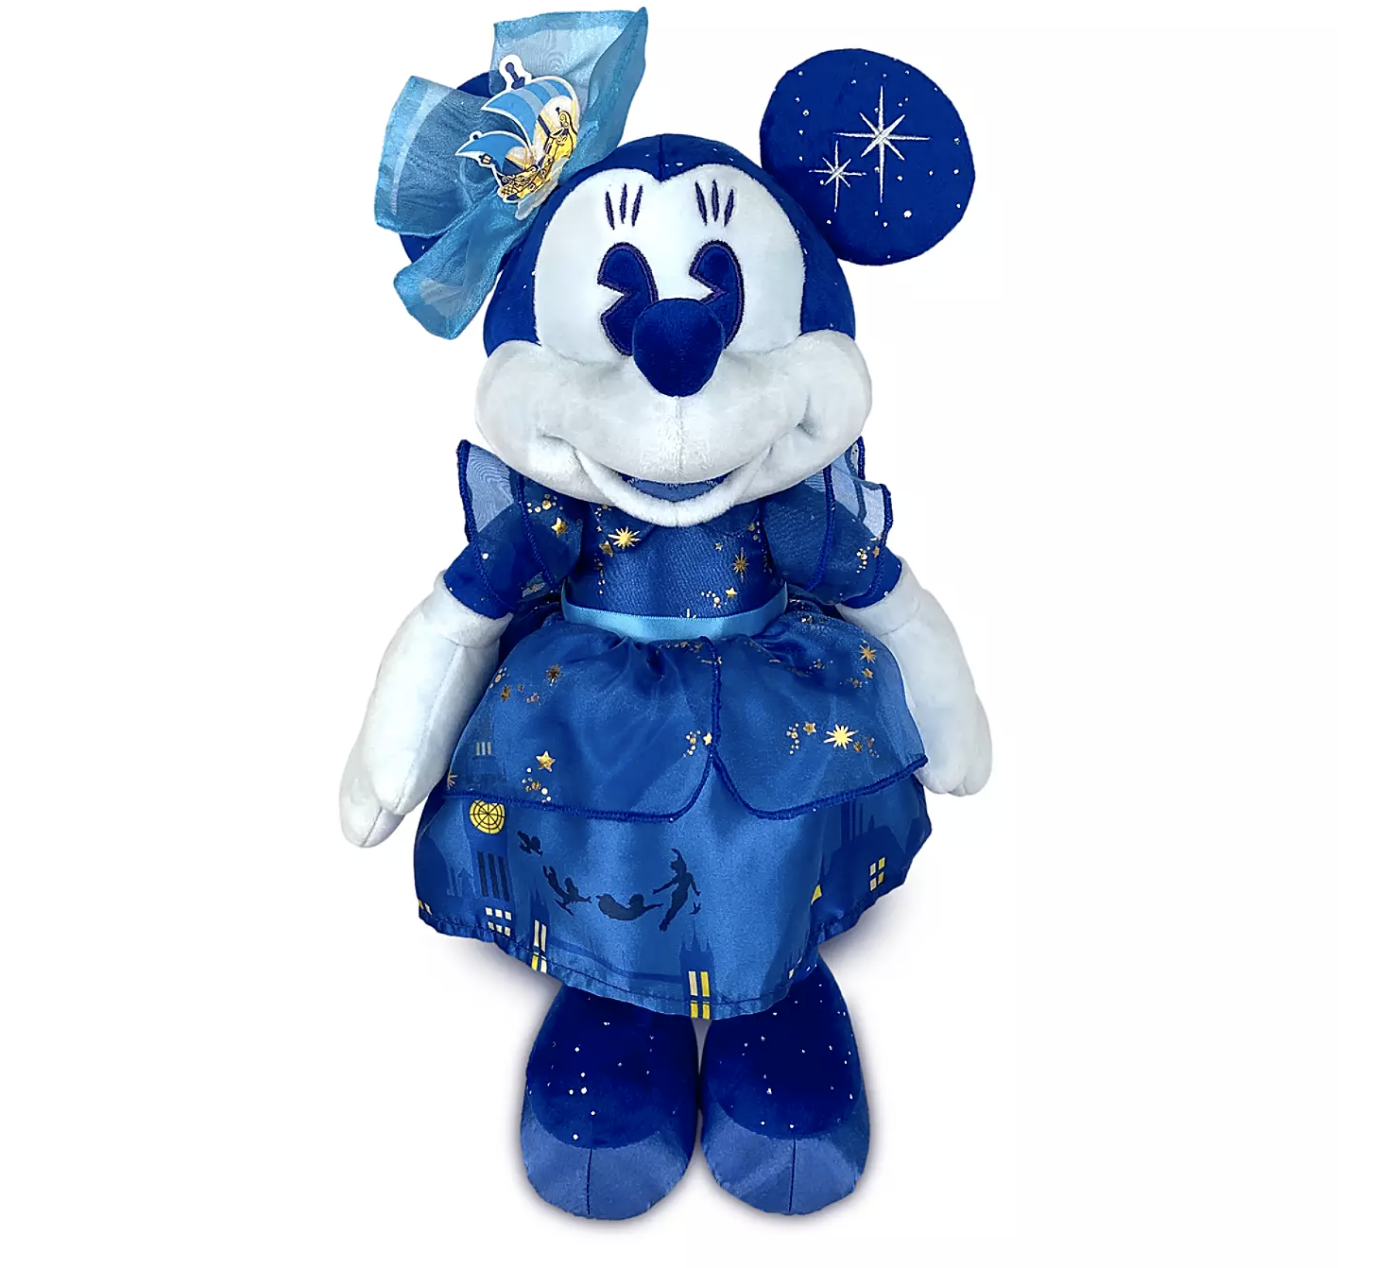 shopDisney 2020 Minnie Mouse Main Attraction Peter Pan Plush - AllEars.Net